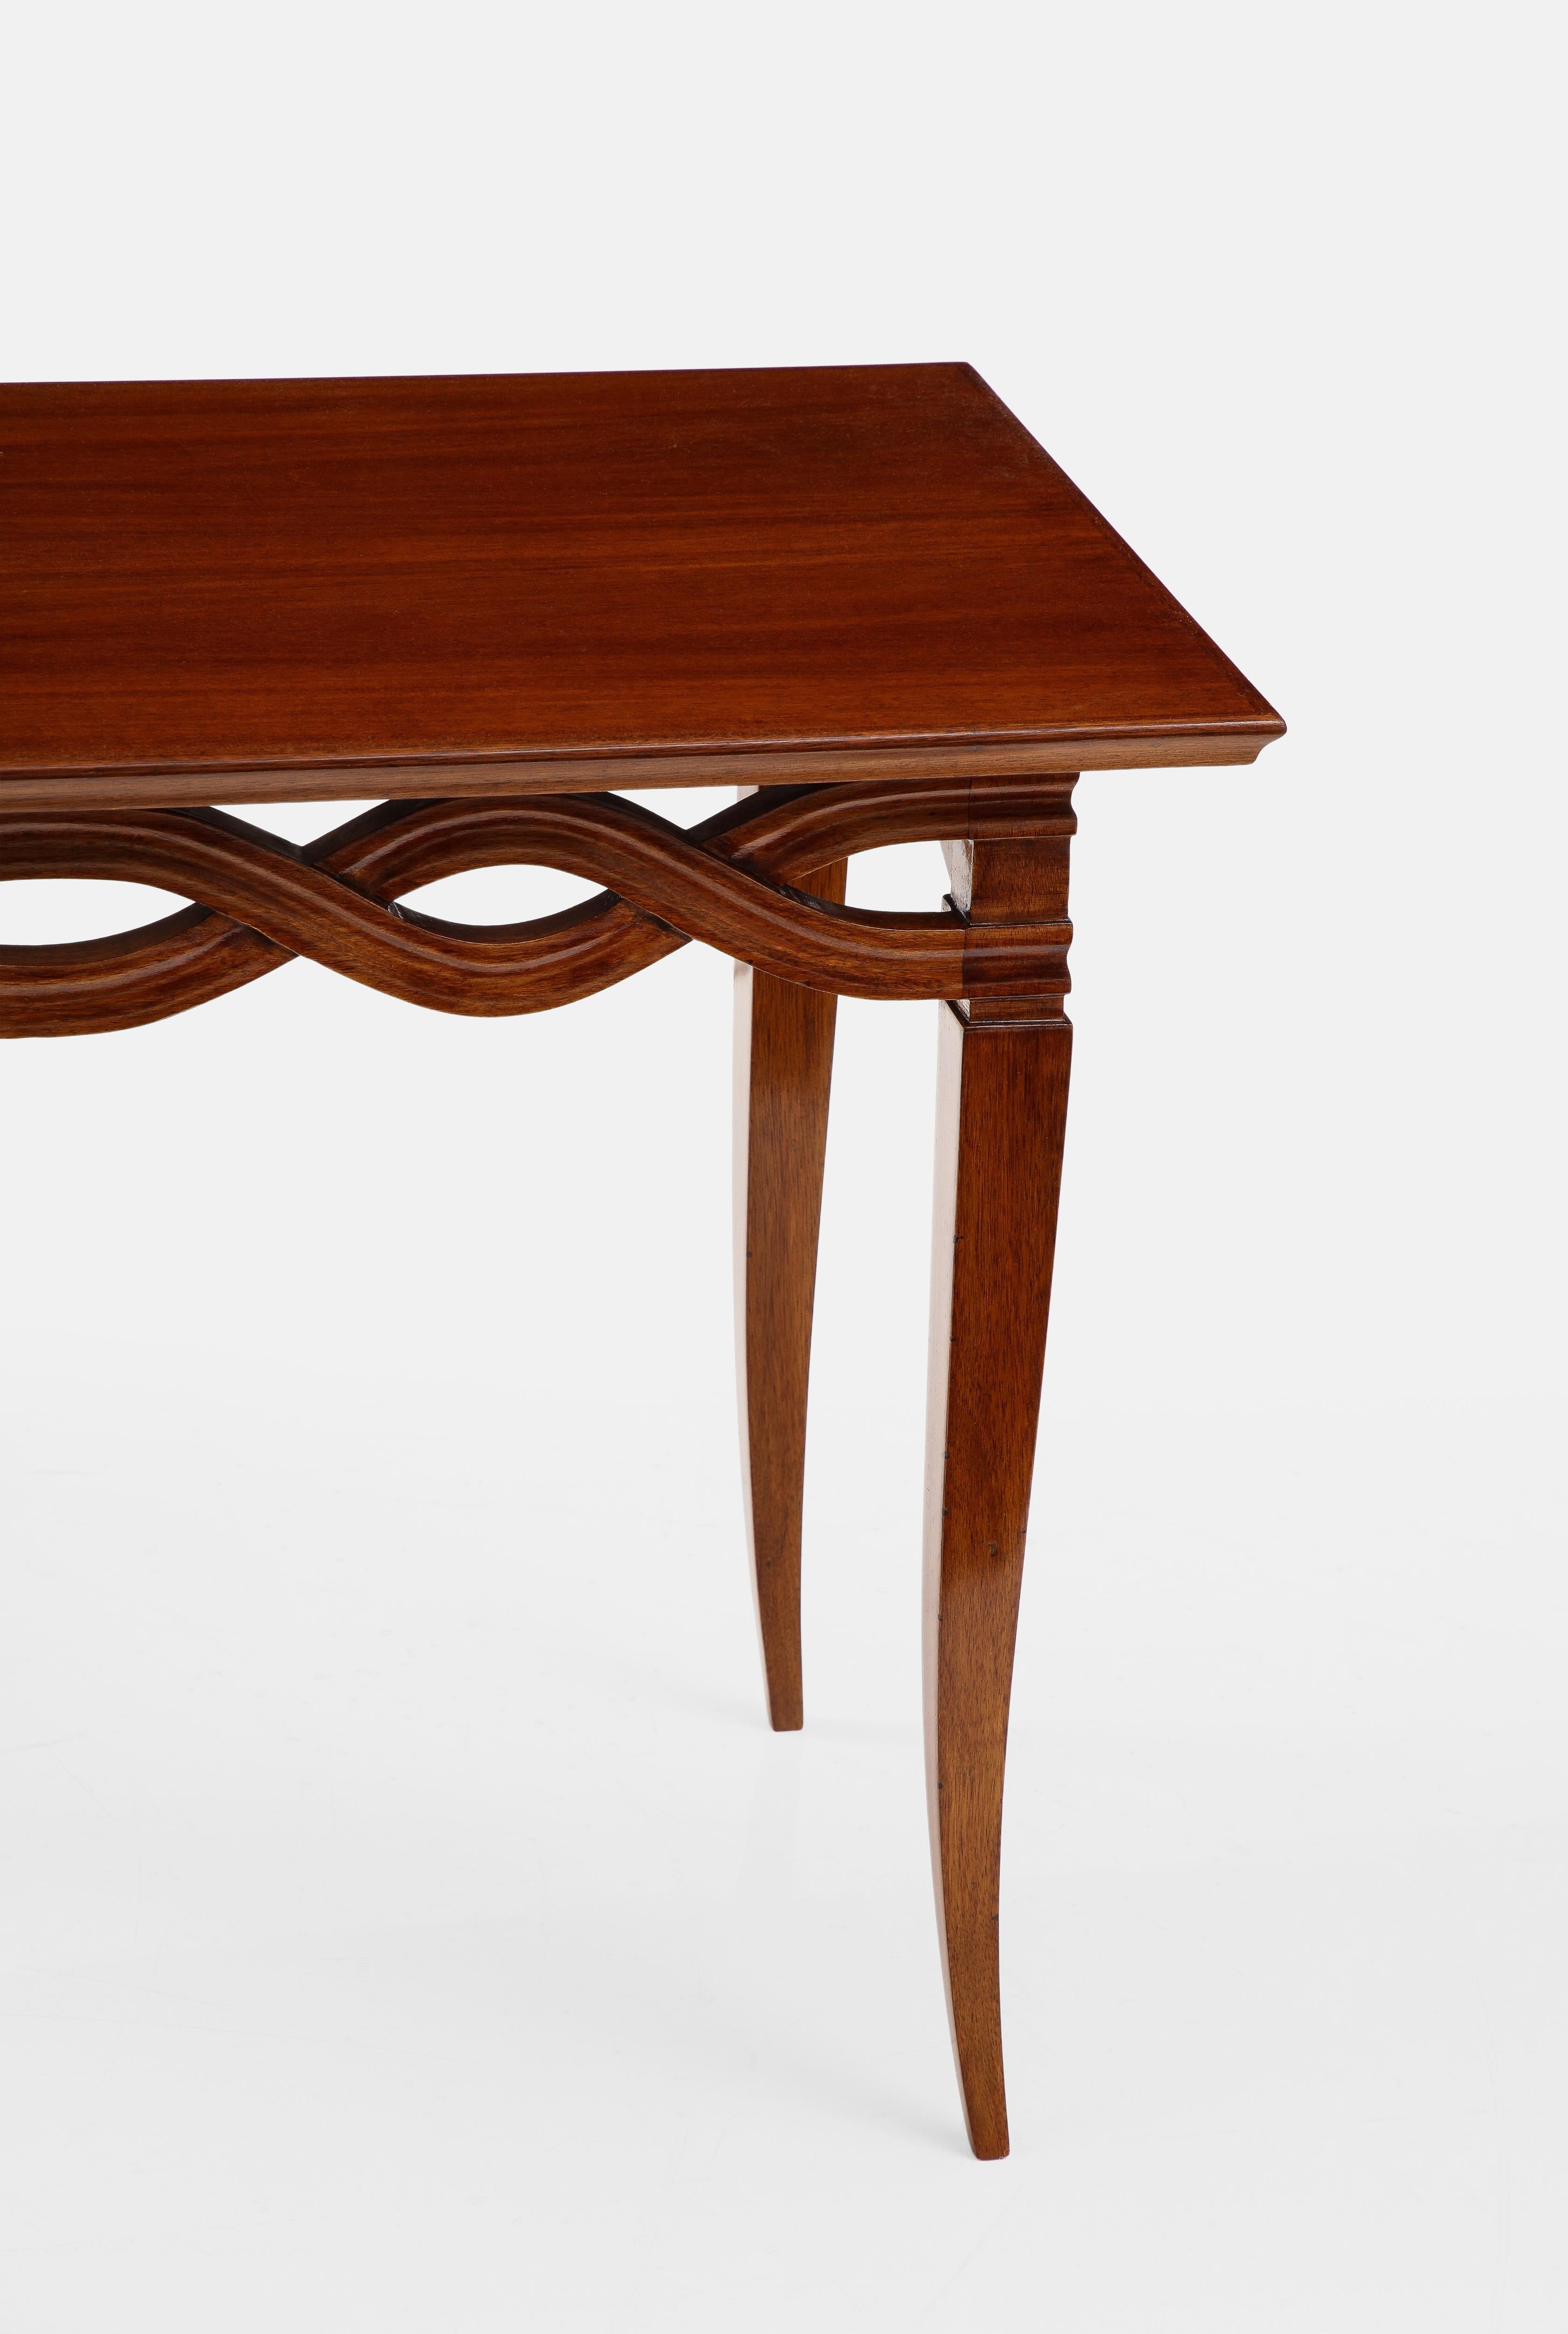 Rare Small Walnut Coffee or Side Table Attributed to Paolo Buffa, Italy, 1940s For Sale 3